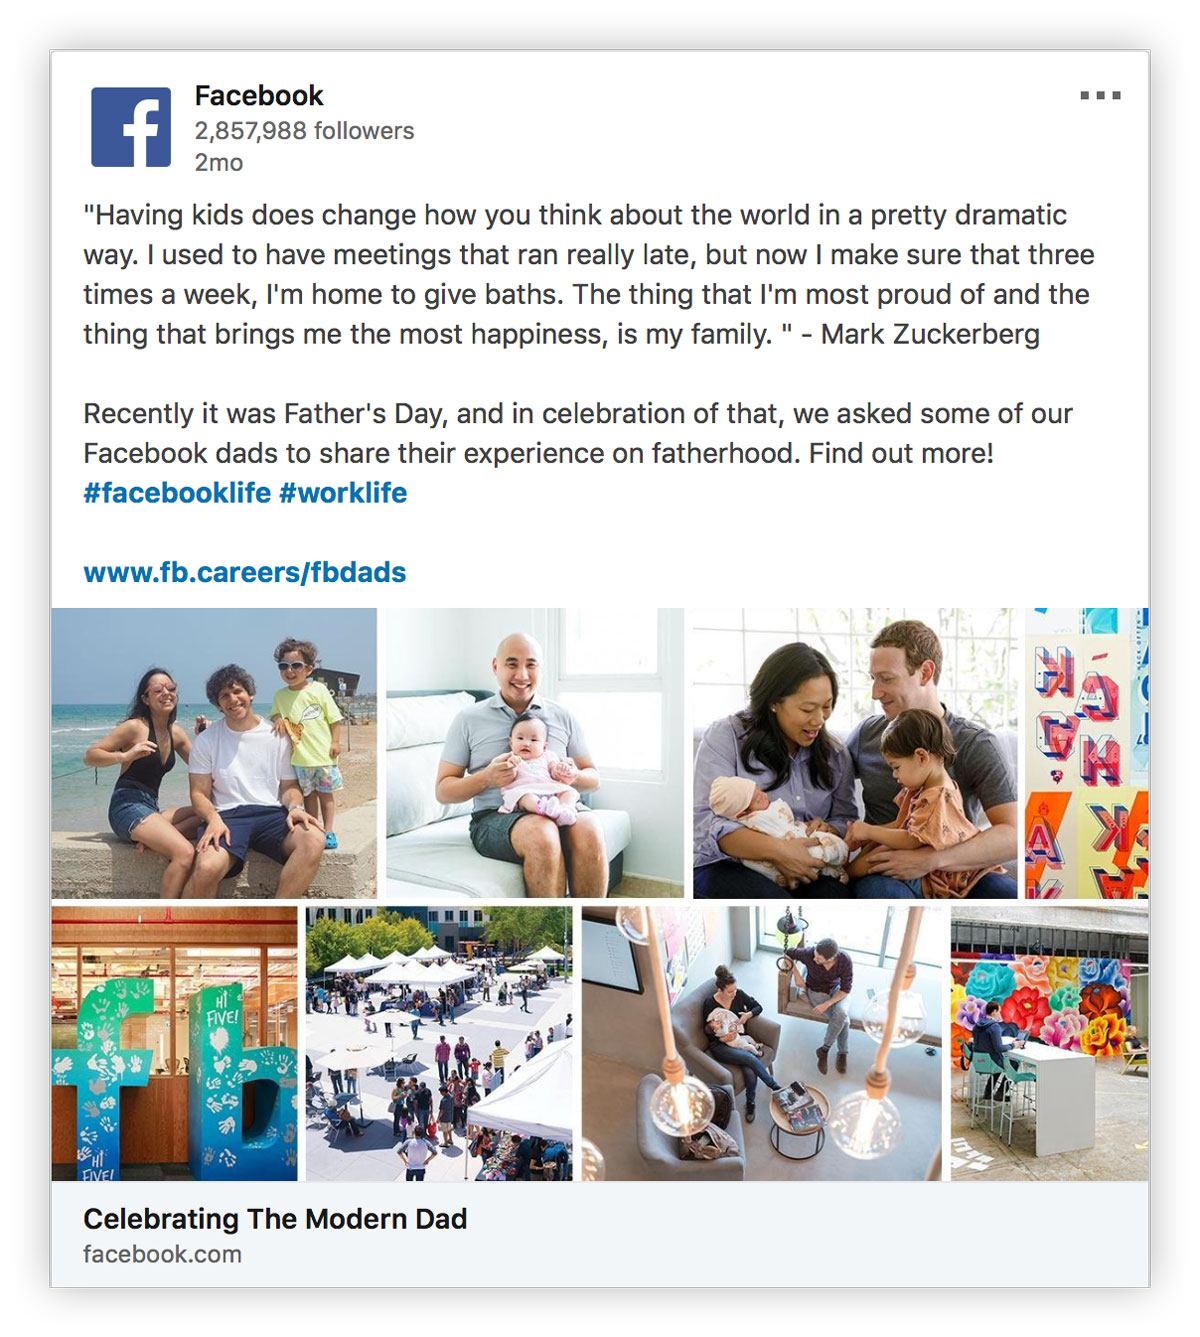 Facebook is more than just social media updates. They post about their employees’ journeys and highlight human interest pieces. 